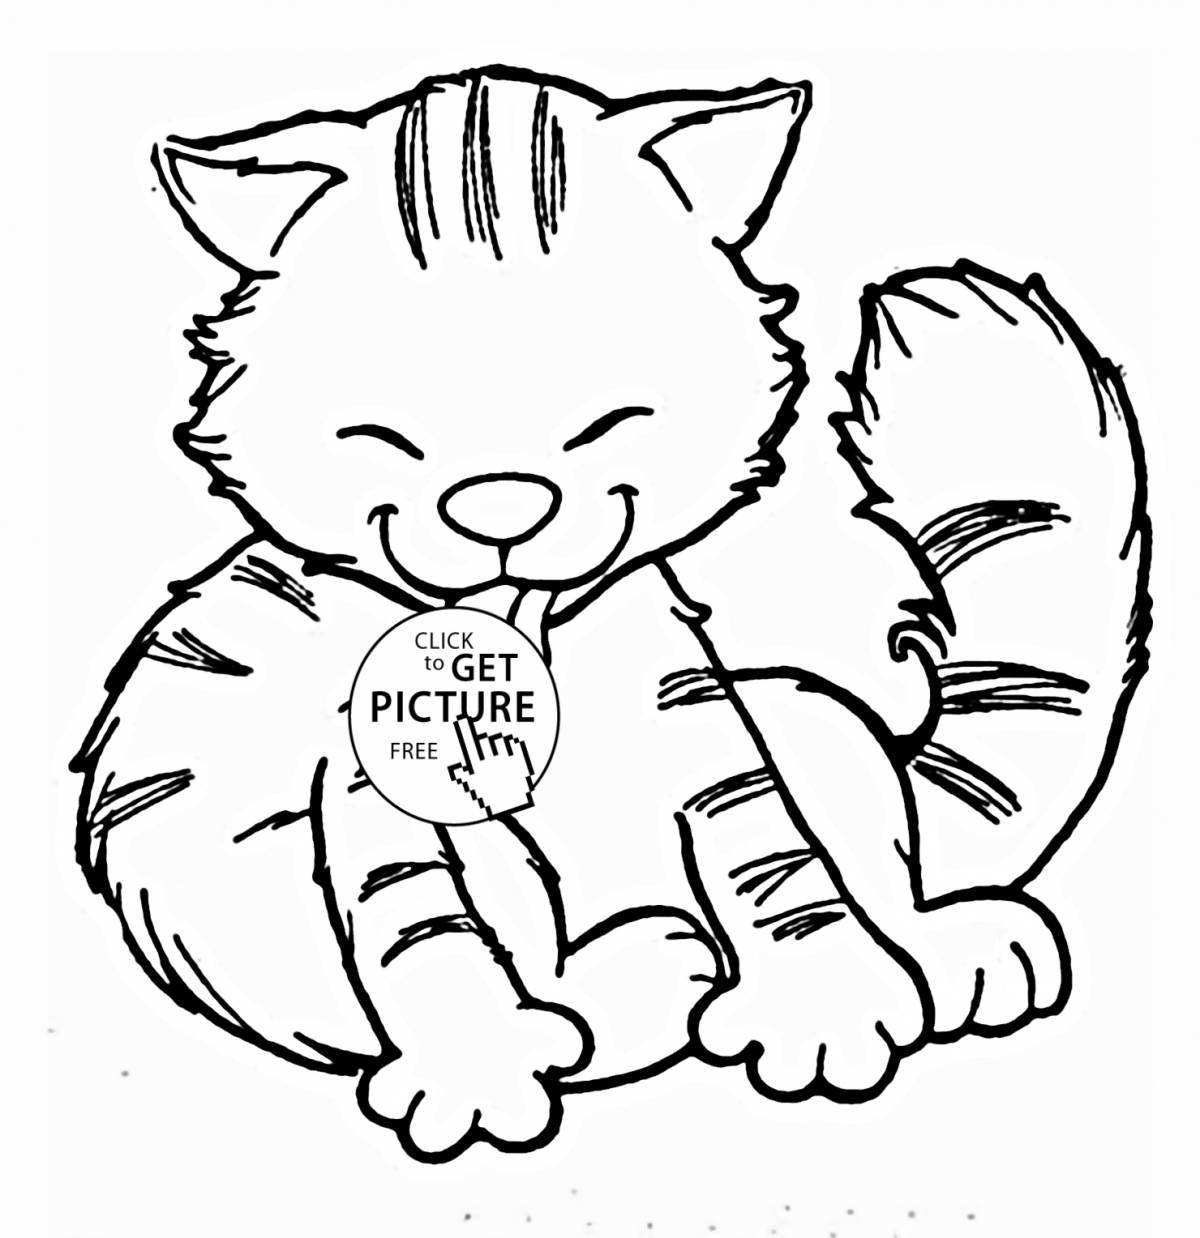 Naughty kittens coloring page